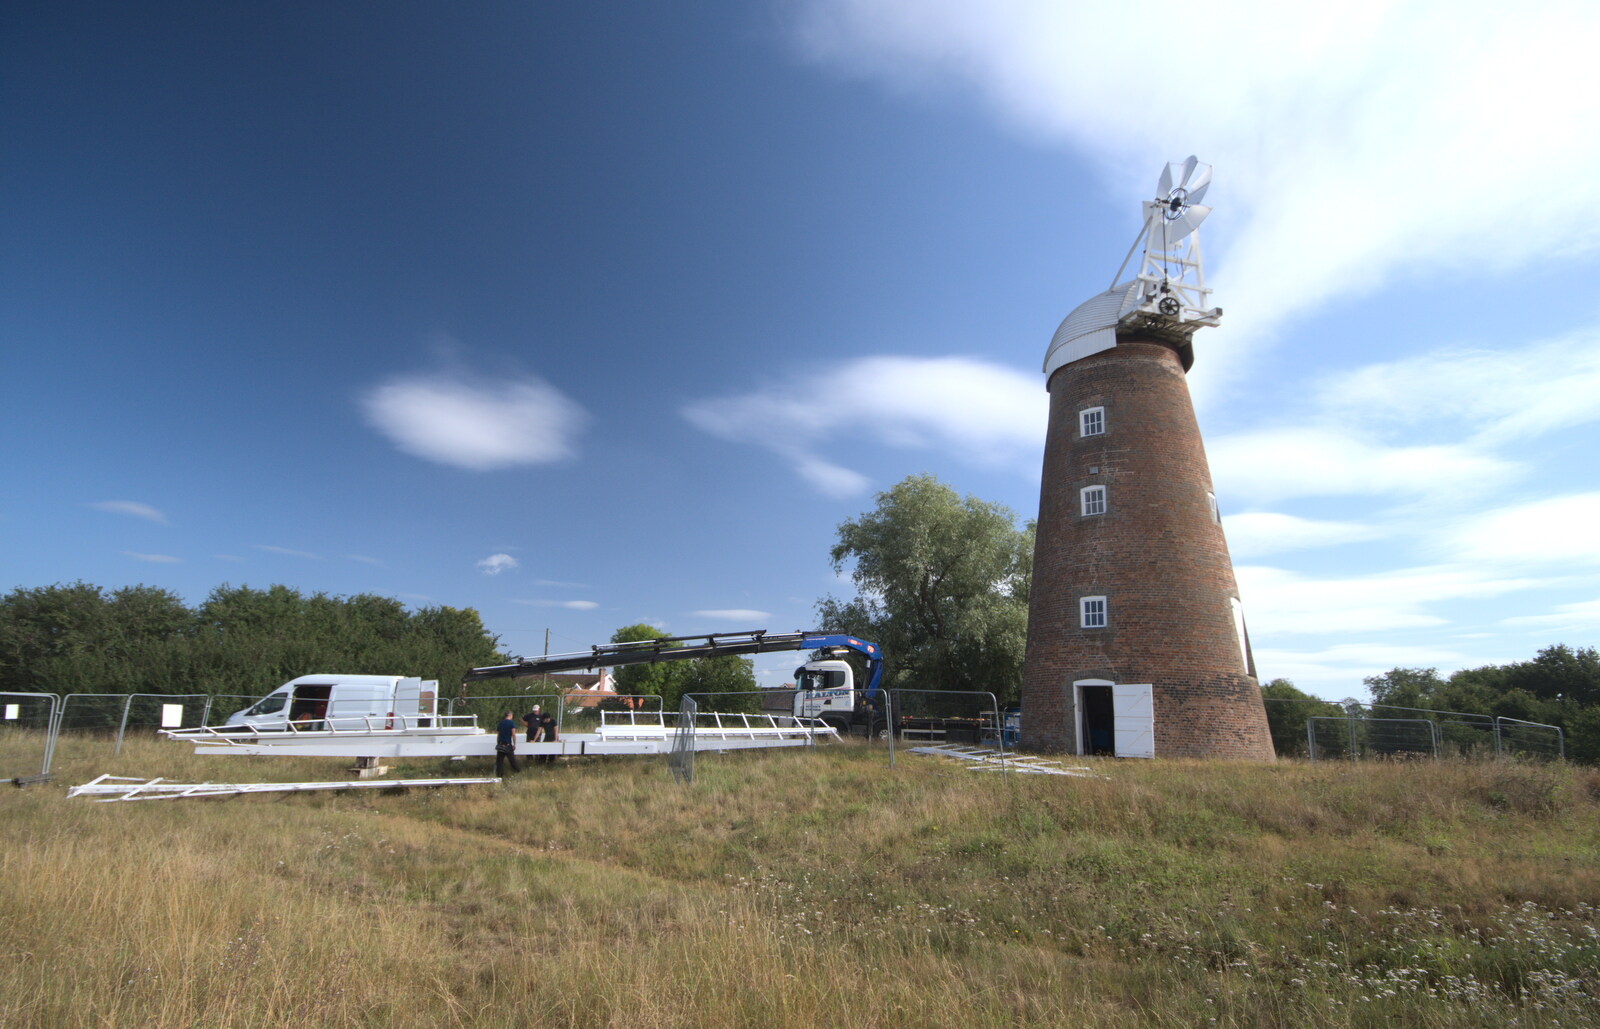 The scene on Billingford Common from A Sail Fitting, Billingford Windmill, Billingford, Norfolk - 20th August 2020